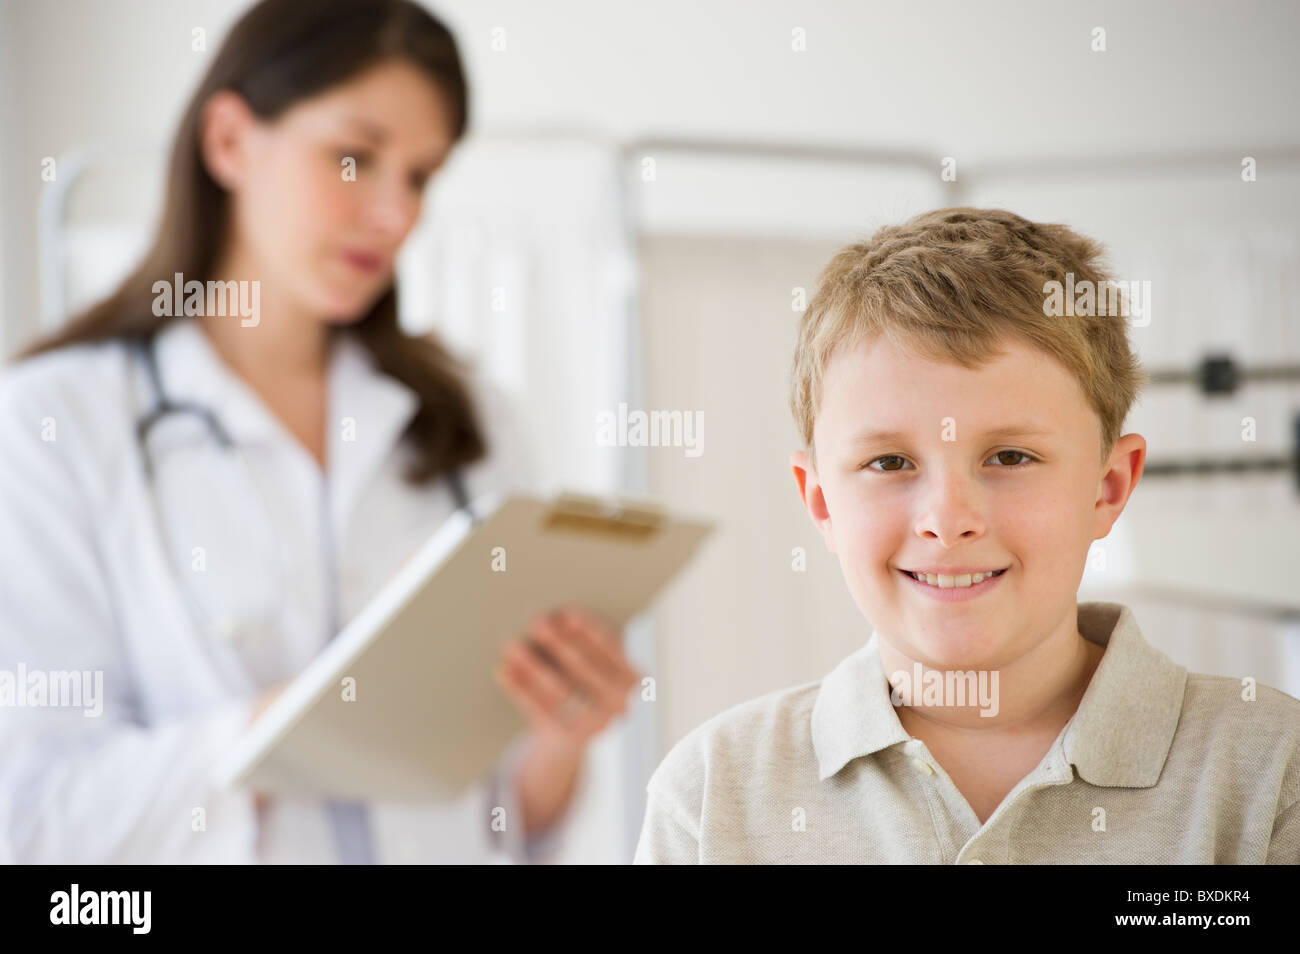 Young boy and doctor in examination room Stock Photo